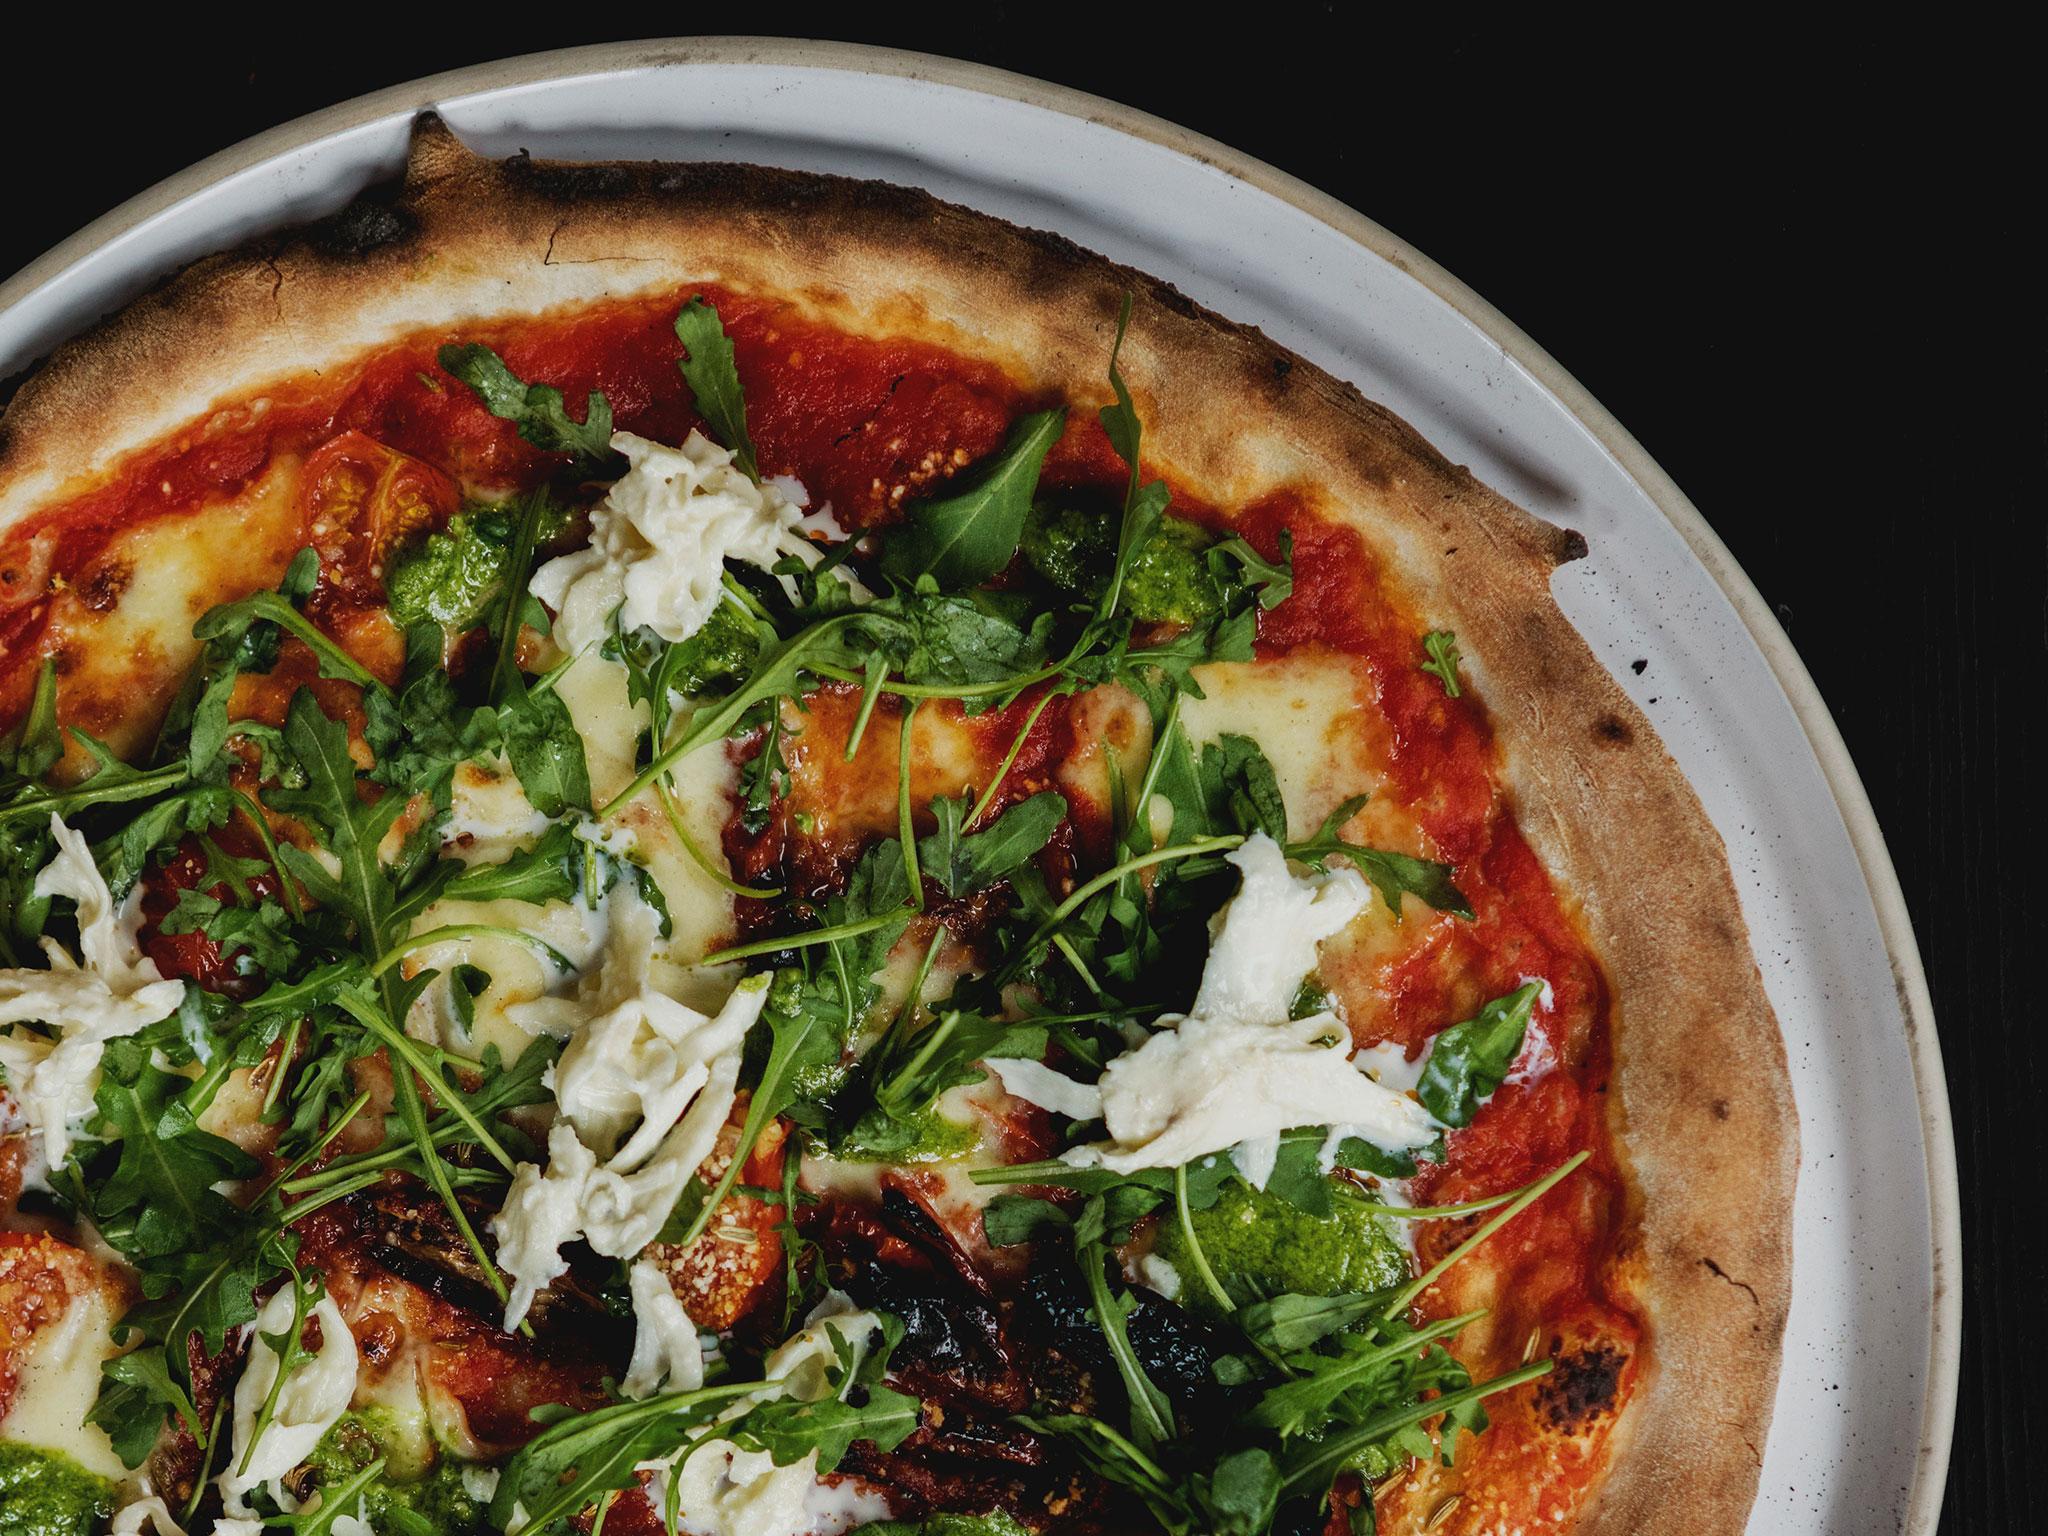 A woodfire pizza by Martello Hall in London